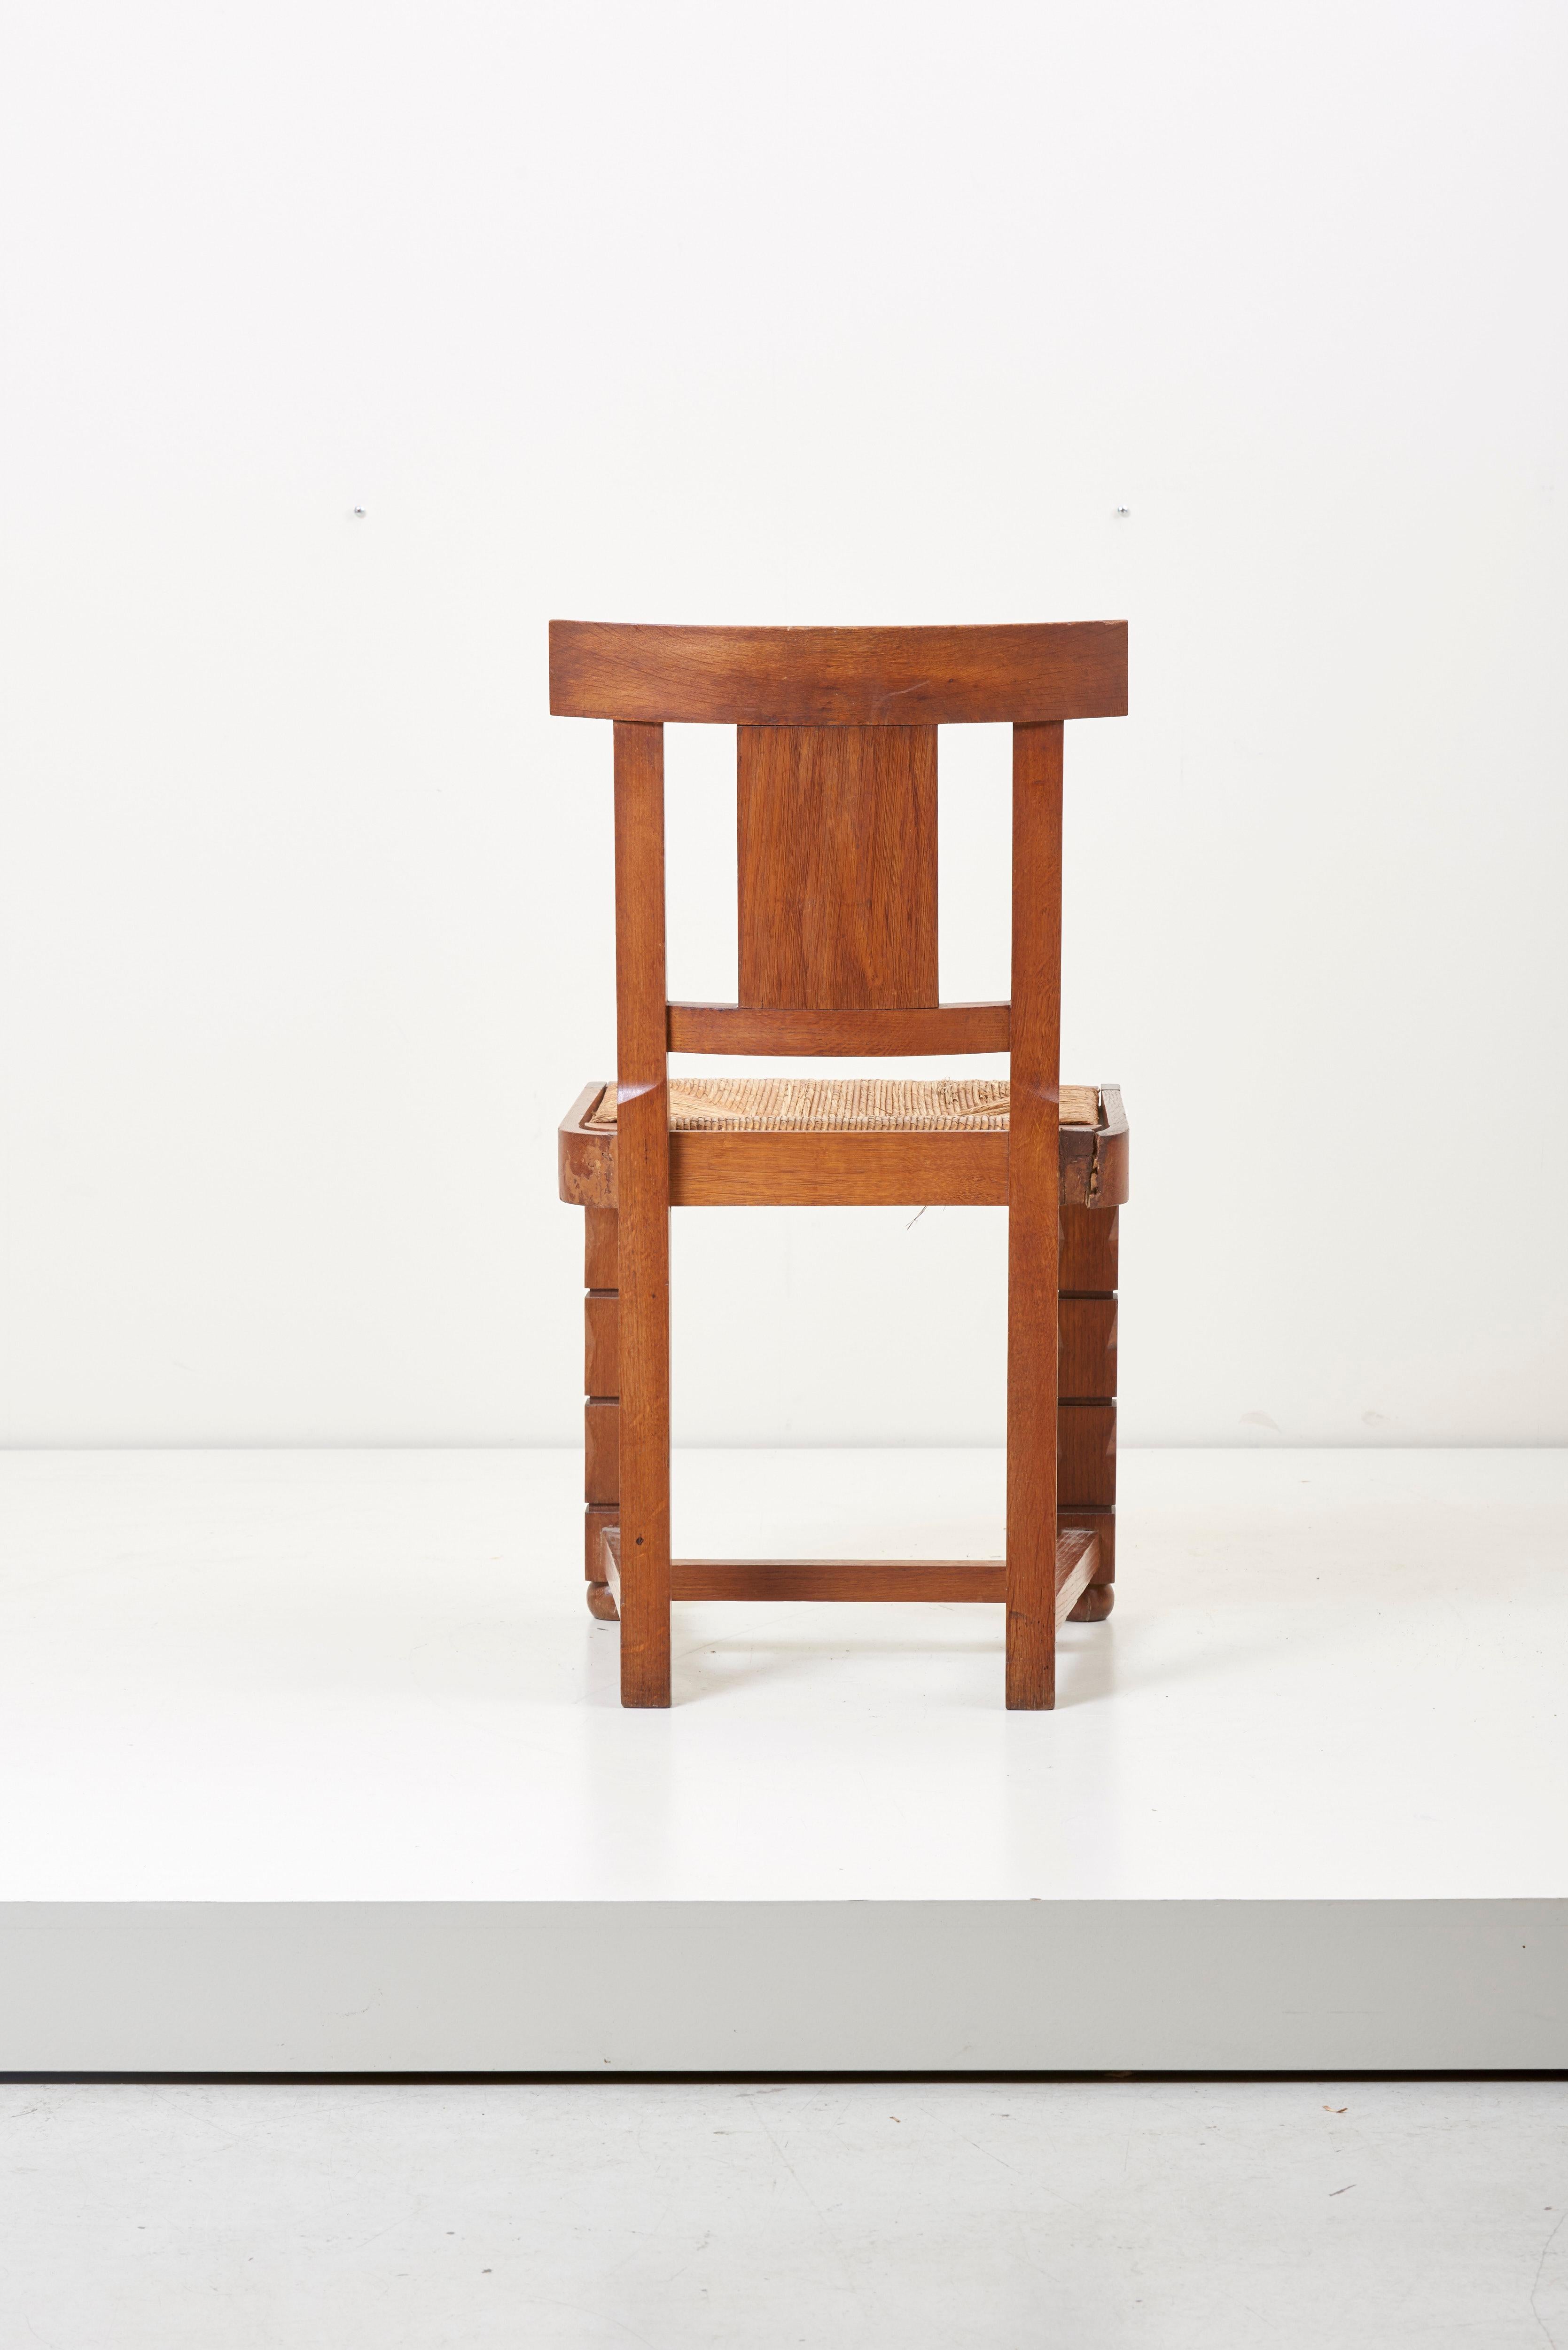 Set of Six Wooden Chairs by Jacques Mottheau, France, 1930s For Sale 2